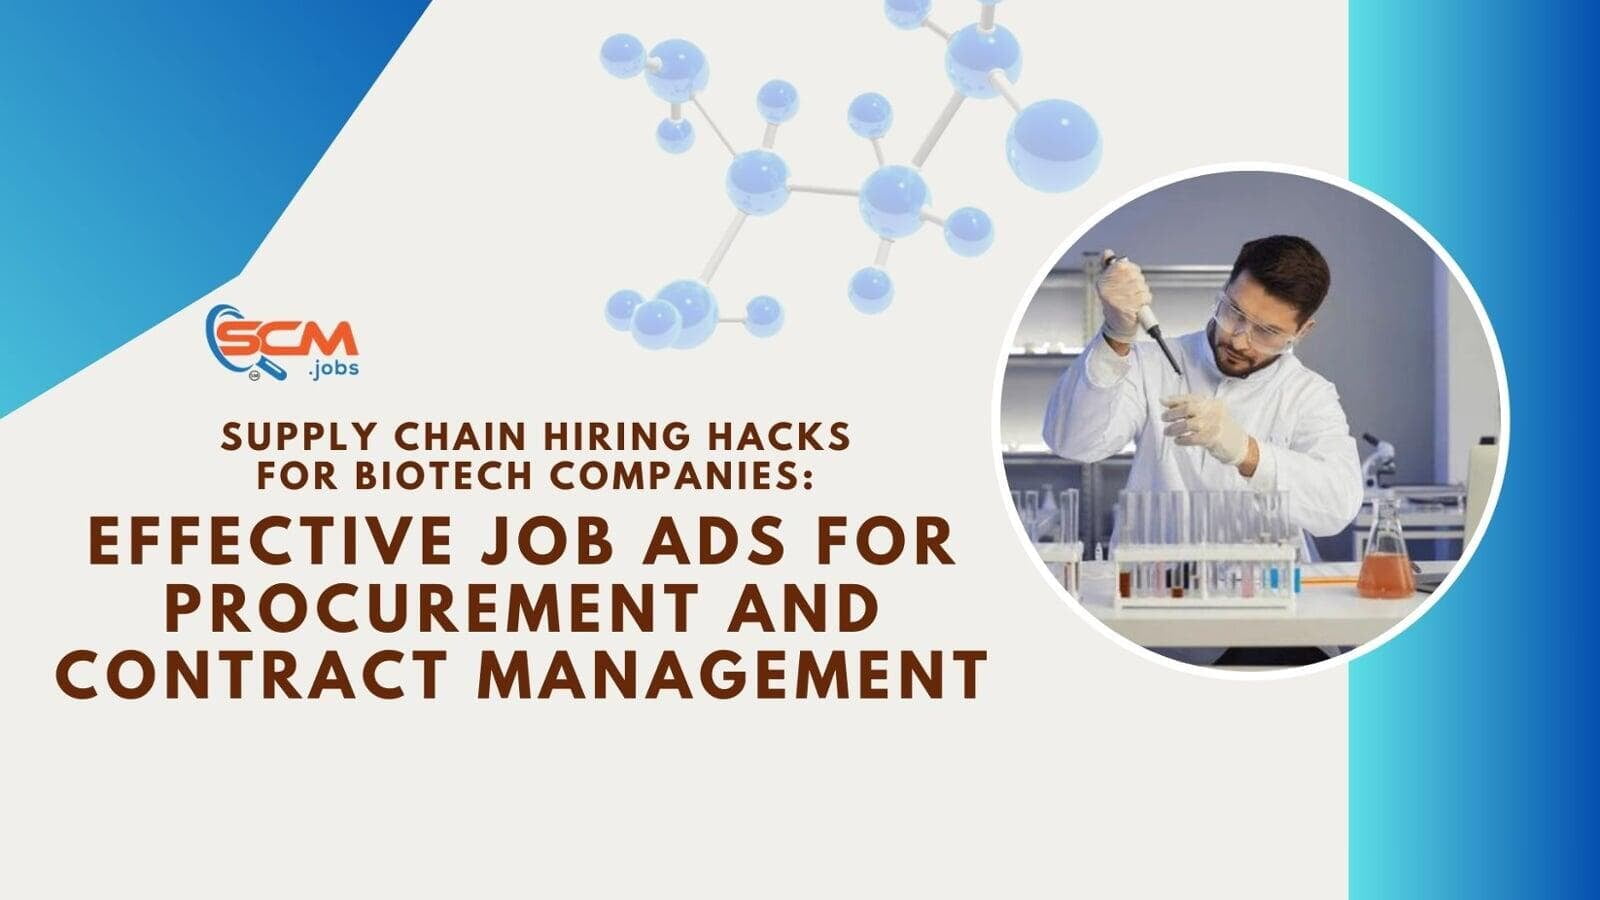 Supply Chain Hiring Hacks for Biotech Companies: Effective Job Ads for Procurement and Contract Management